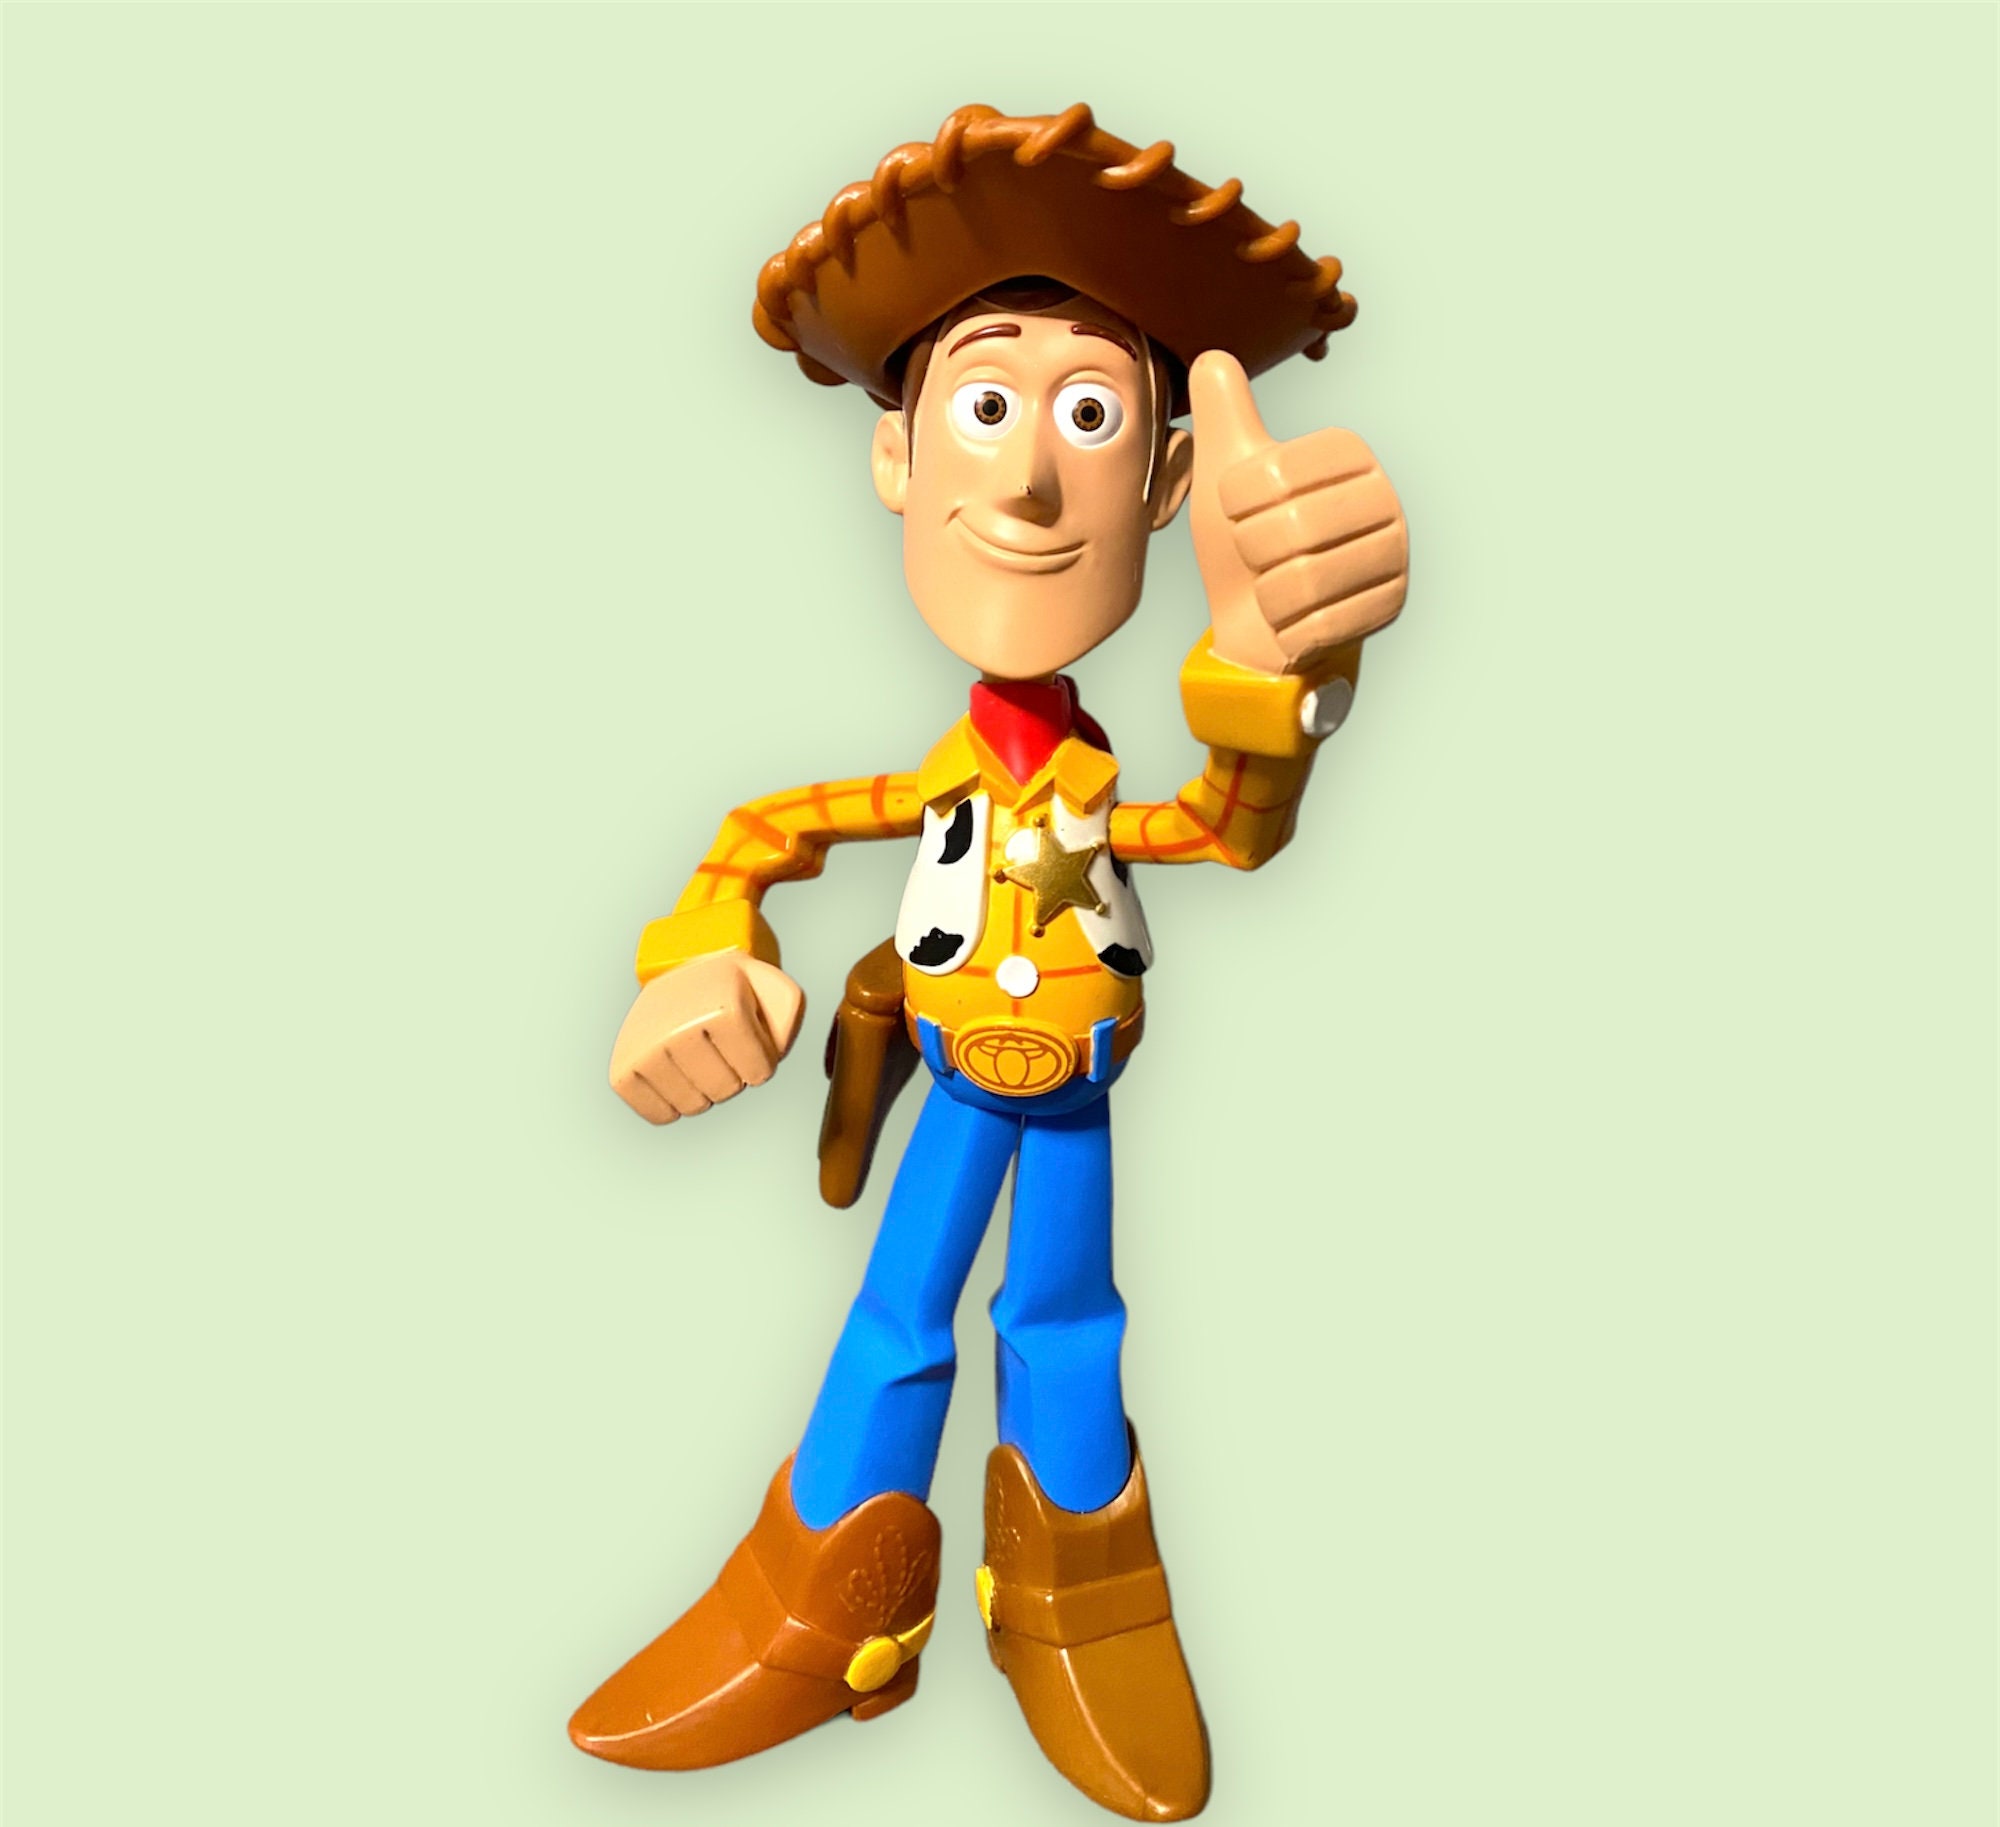 Toystory Woody Voice pic